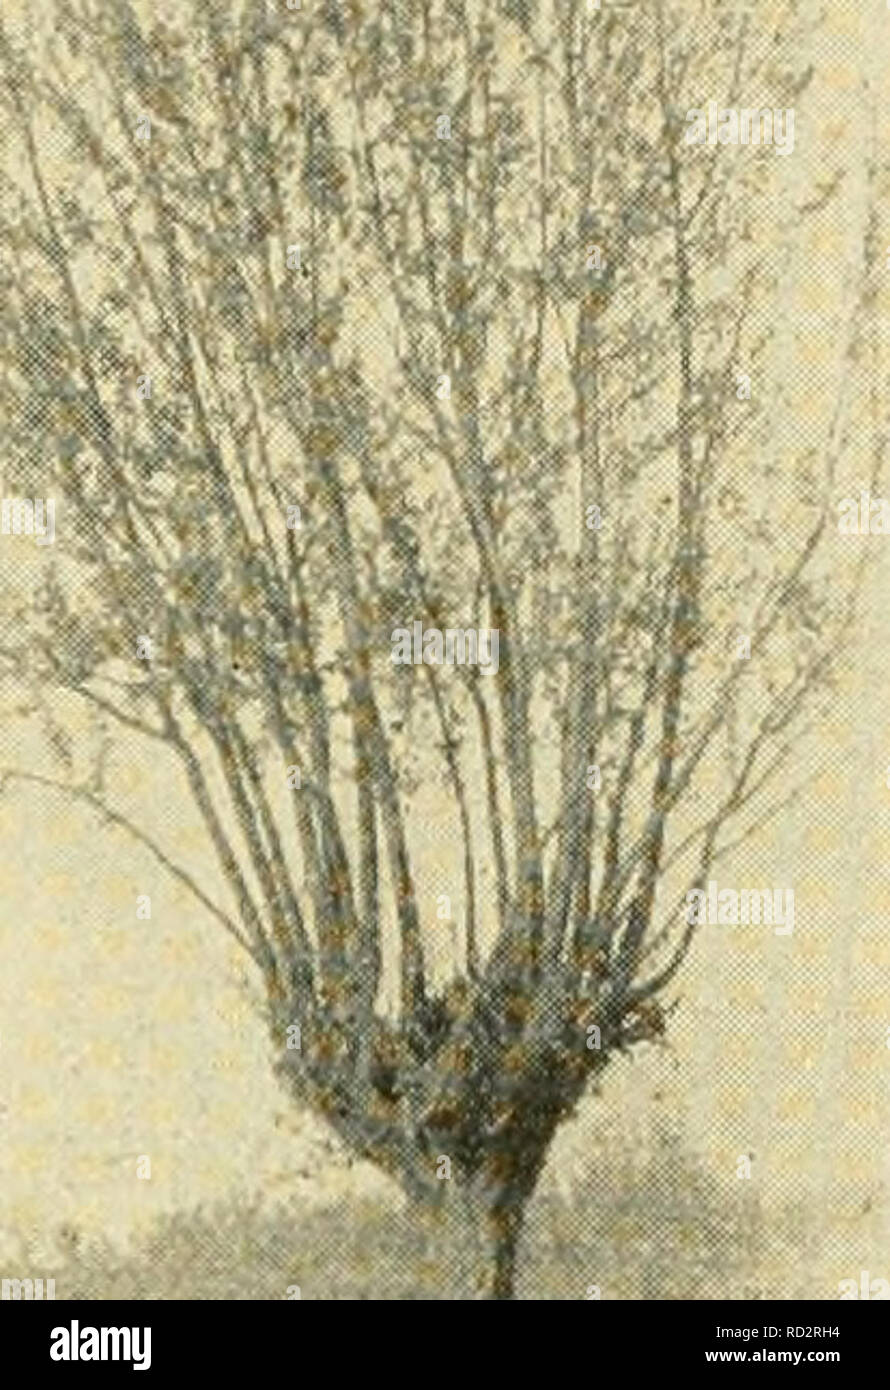 . Elementary biology; an introduction to the science of life. Biology. Fig. 109. Pollarded trees White poplars {Populus alba) pollarded to supply building poles in Chinese Turkestan. Pollarding is the pruning or trimming of the branches of a tree so as to make more twigs develop. (From a photograph by F. N. Meyer, of the United States Bureau of Plant Industr}') It is possible by grafting buds or twigs to get several different varieties of apples, for example, to grow on the branches of one tree. As a rule, only closely related varieties of plants can be made to graft on one another in this way Stock Photo